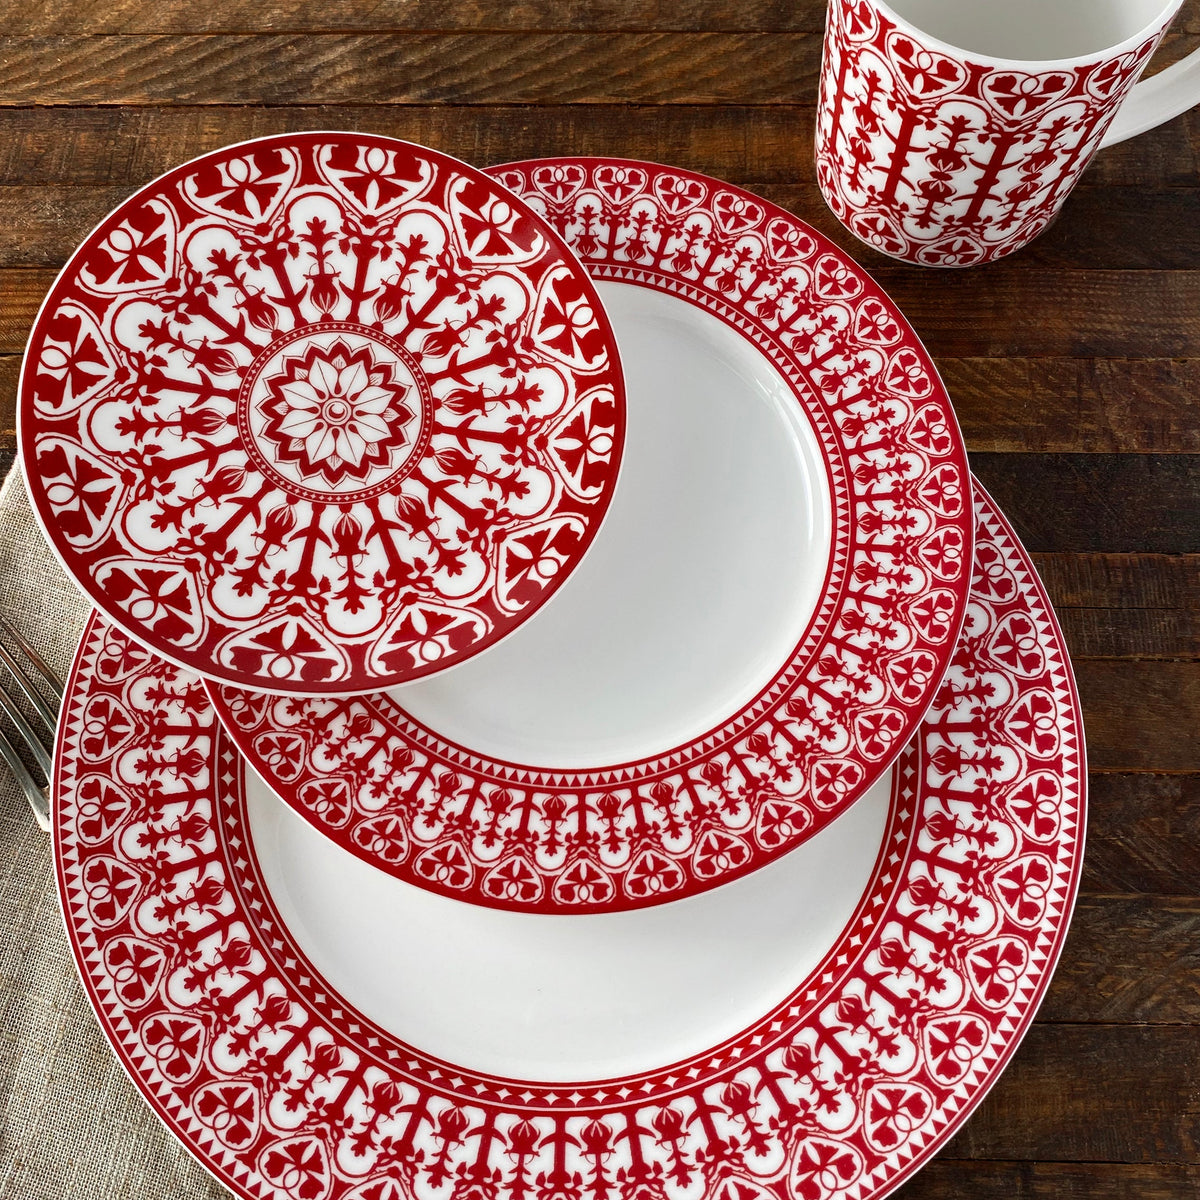 A table setting with heirloom-quality white and red patterned Casablanca dinnerware, including Caskata Artisanal Home Casablanca Crimson Small Plates, salad plate, bowl, and cup arranged neatly on a wooden surface.